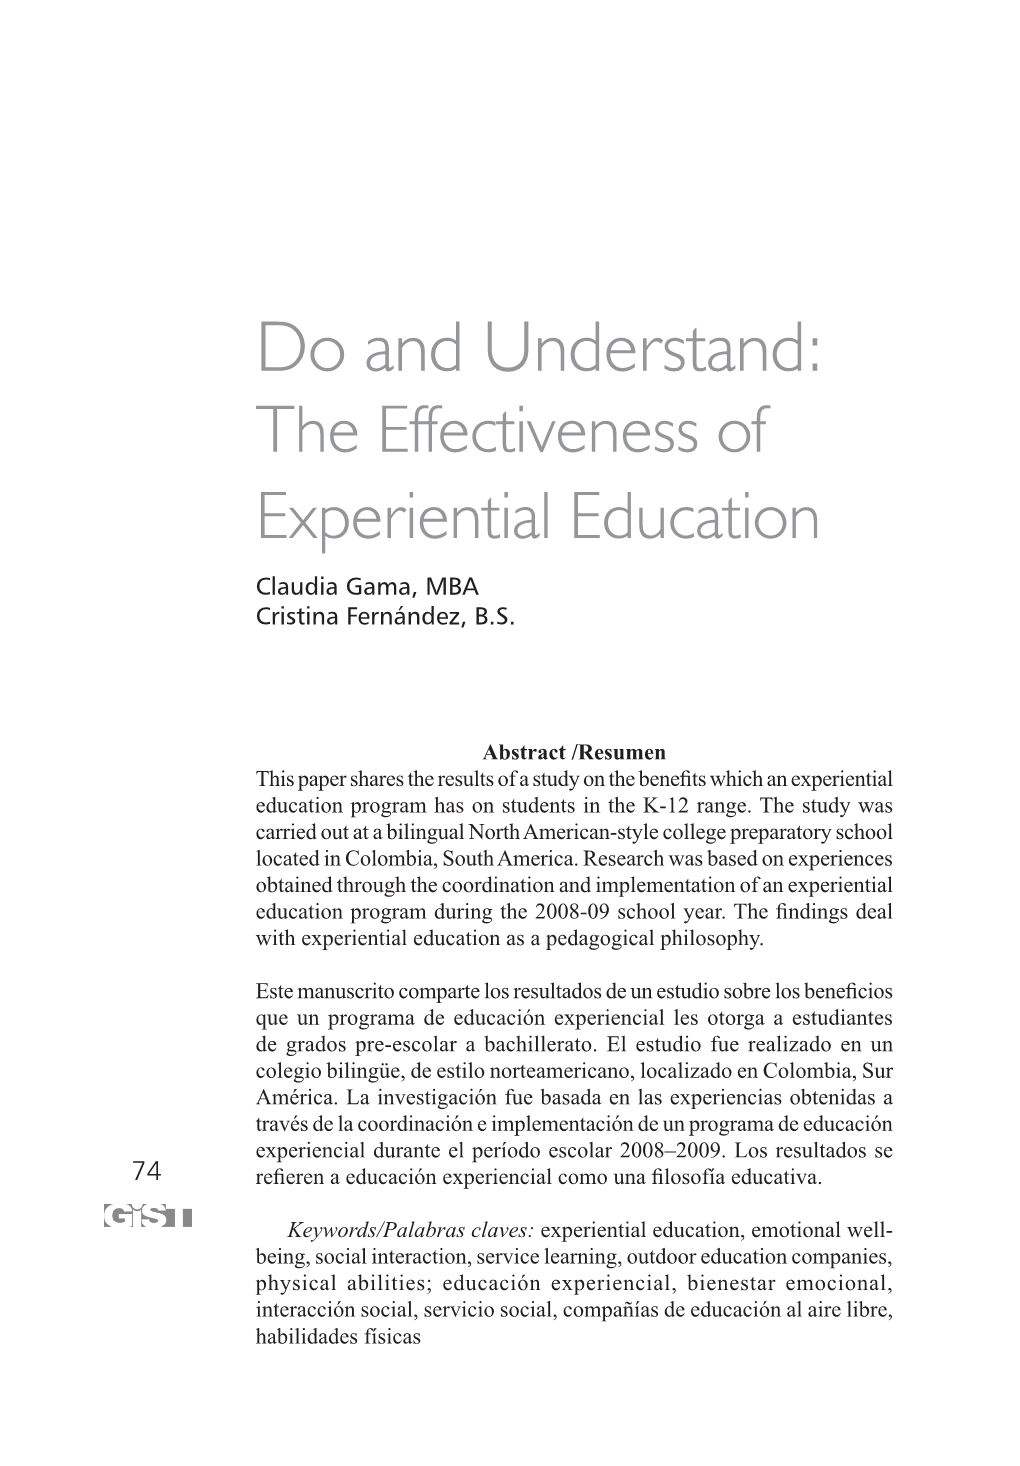 Do and Understand: the Effectiveness of Experiential Education Claudia Gama, MBA Cristina Fernández, B.S